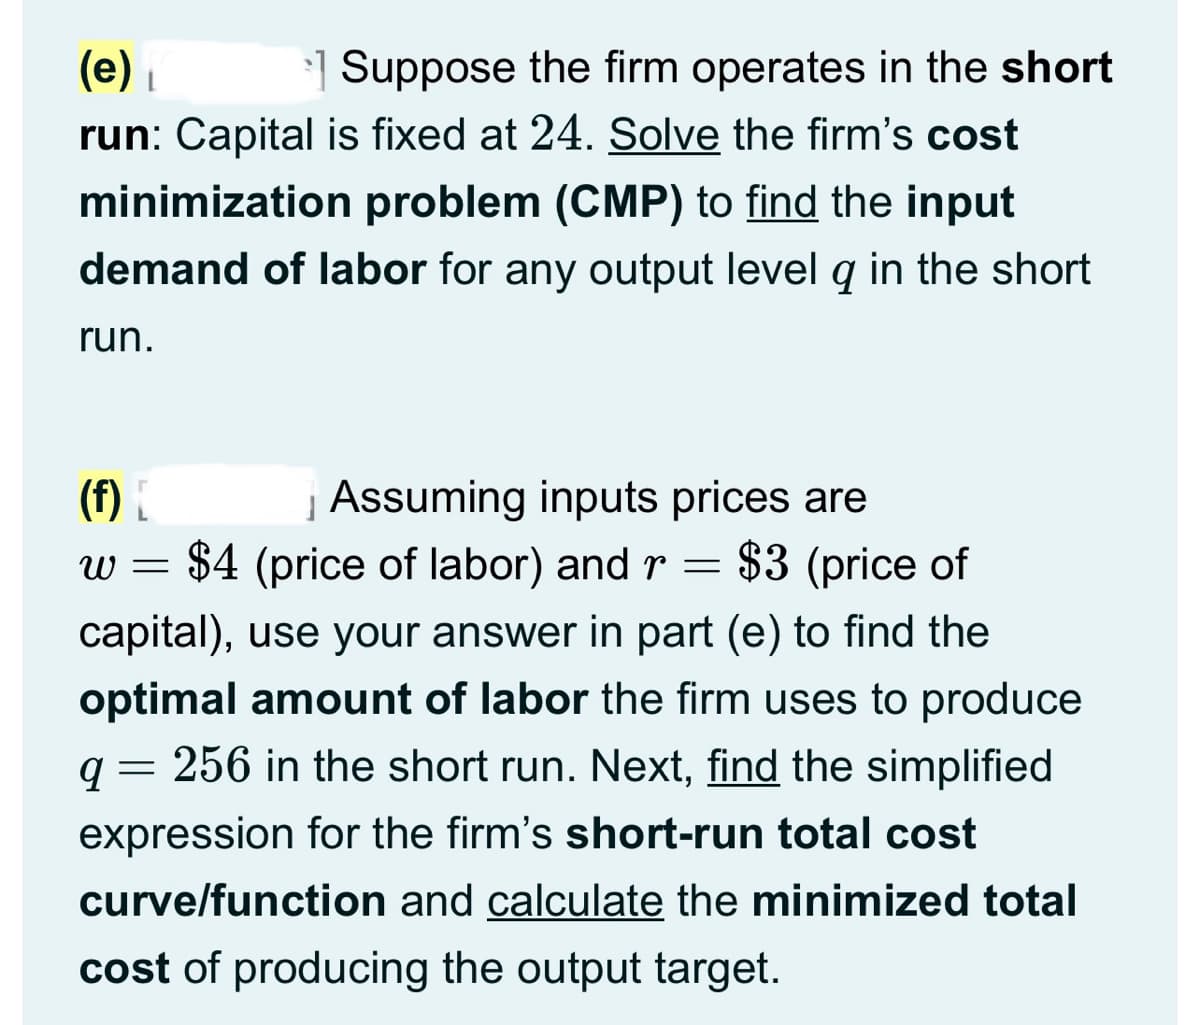 (e) ₁
Suppose the firm operates in the short
run: Capital is fixed at 24. Solve the firm's cost
minimization problem (CMP) to find the input
demand of labor for any output level q in the short
run.
(f) [
} Assuming inputs prices are
w =
: $4 (price of labor) and r = $3 (price of
capital), use your answer in part (e) to find the
optimal amount of labor the firm uses to produce
256 in the short run. Next, find the simplified
expression for the firm's short-run total cost
9
=
curve/function and calculate the minimized total
cost of producing the output target.